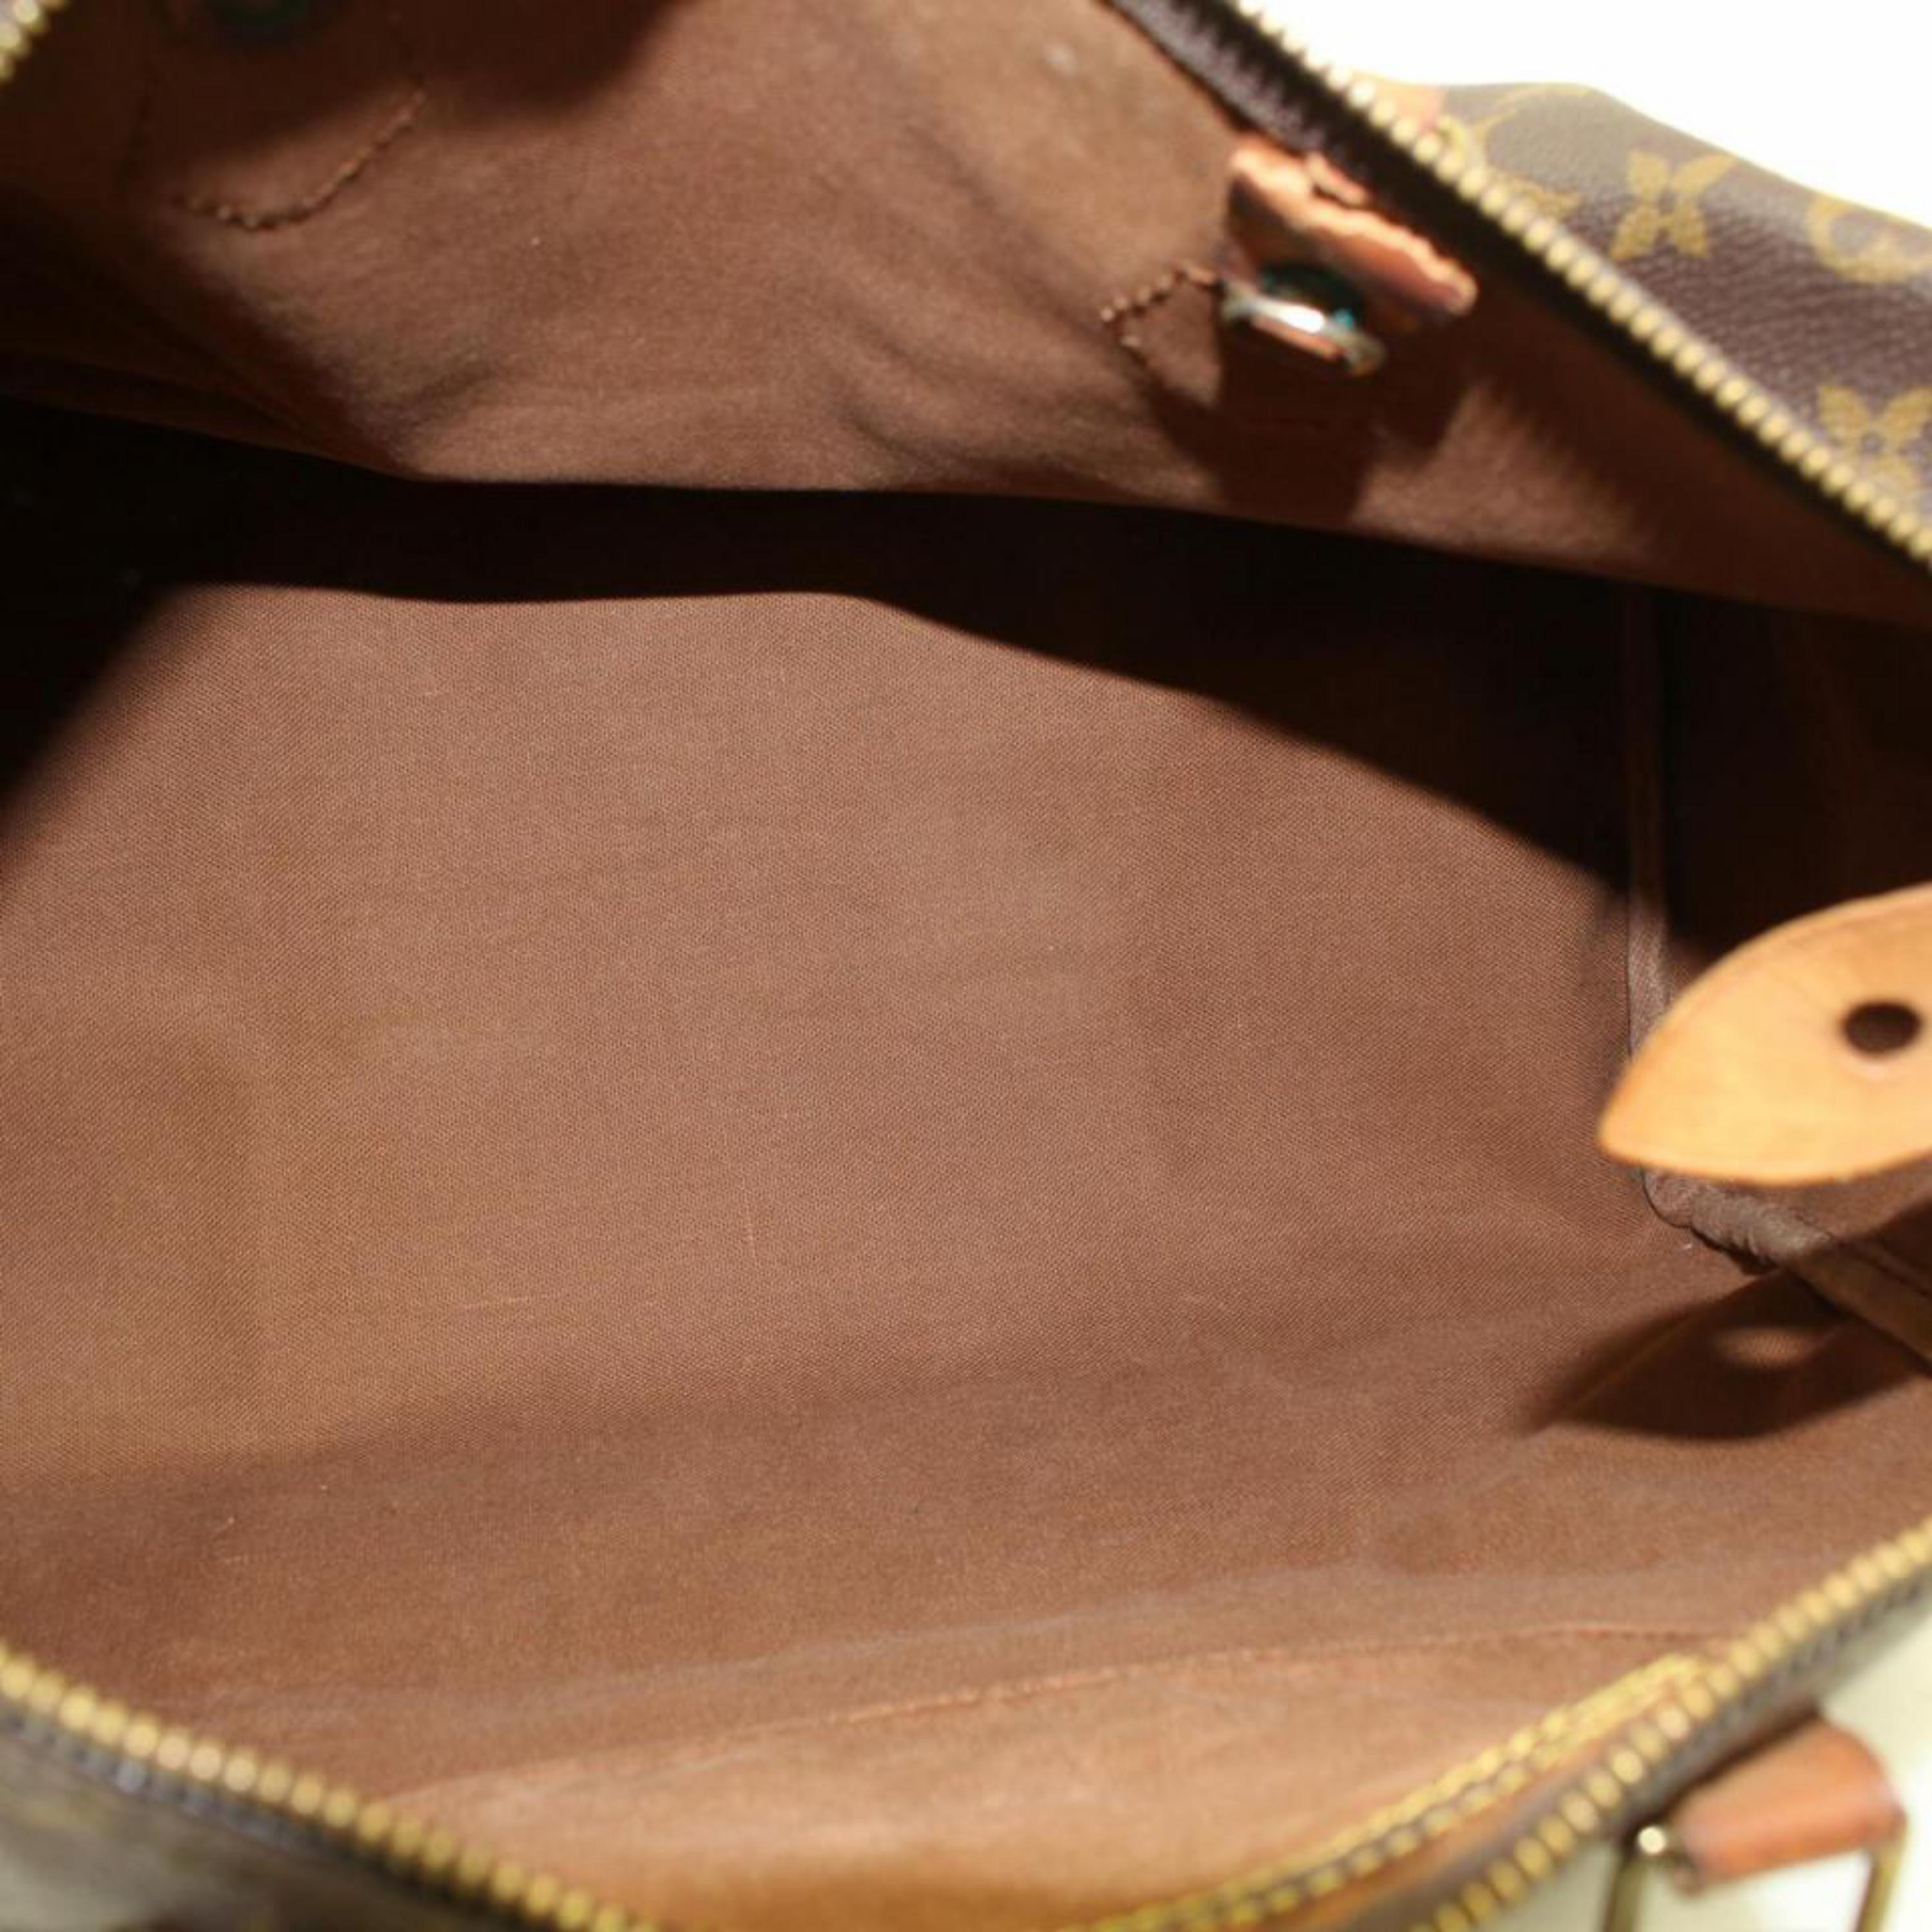 Louis Vuitton Speedy Monogram 35 869197 Brown Coated Canvas Satchel In Good Condition For Sale In Forest Hills, NY